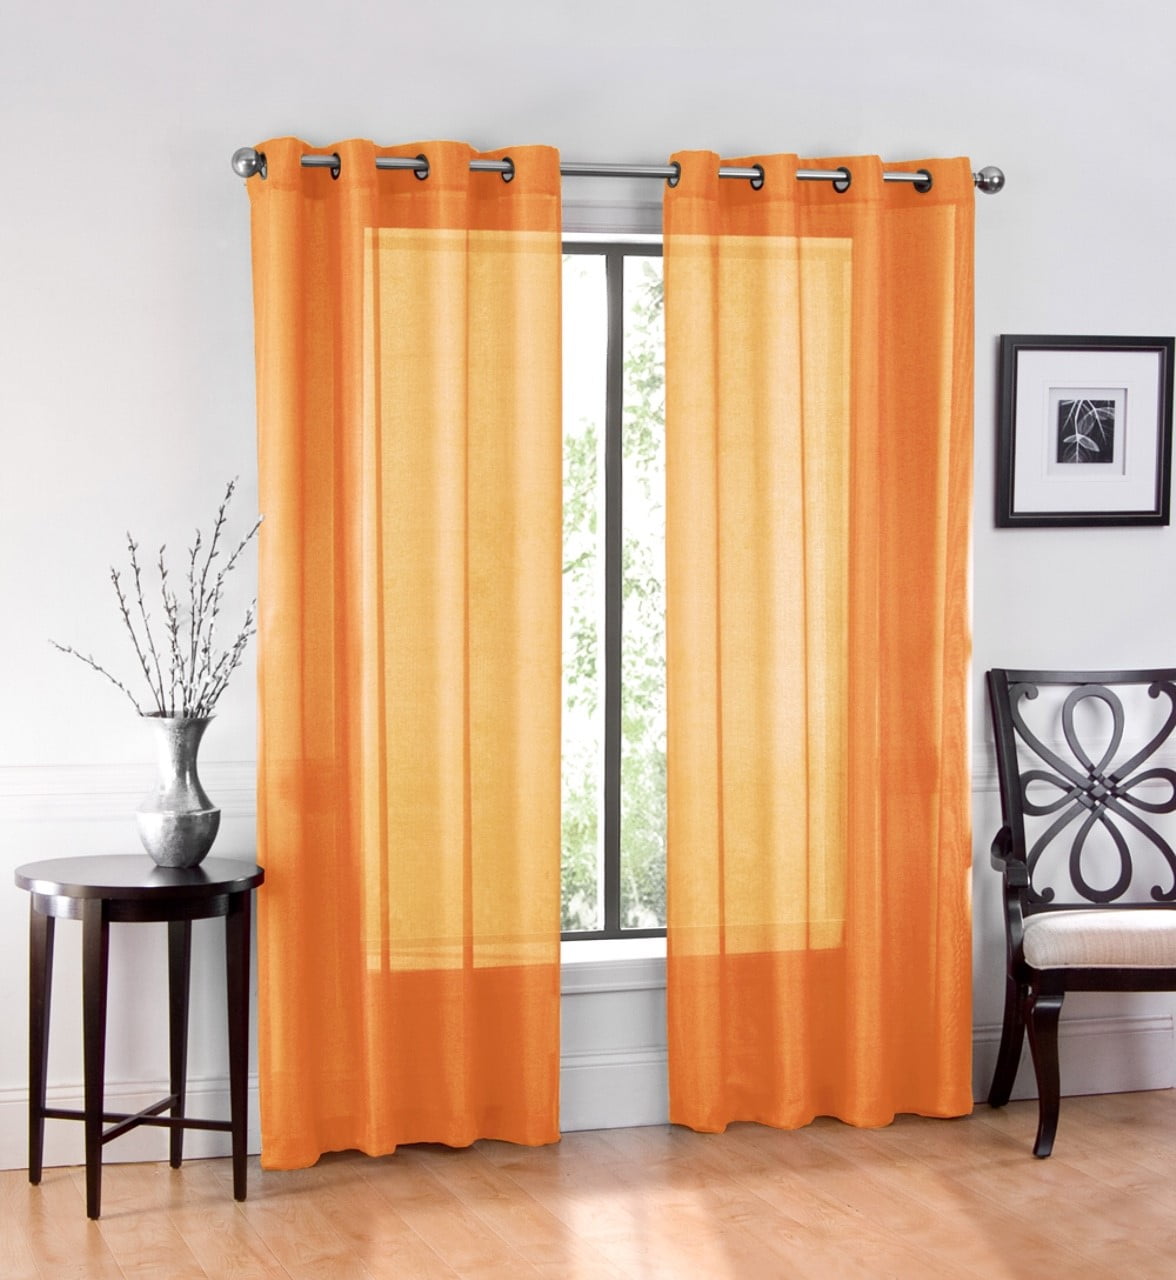 Purple Ruthy's Textile 2 Piece Window Sheer Curtains Grommet Panels 54 X 84 Total 108 X 84 Inch Length for Bedroom/Living Room Color